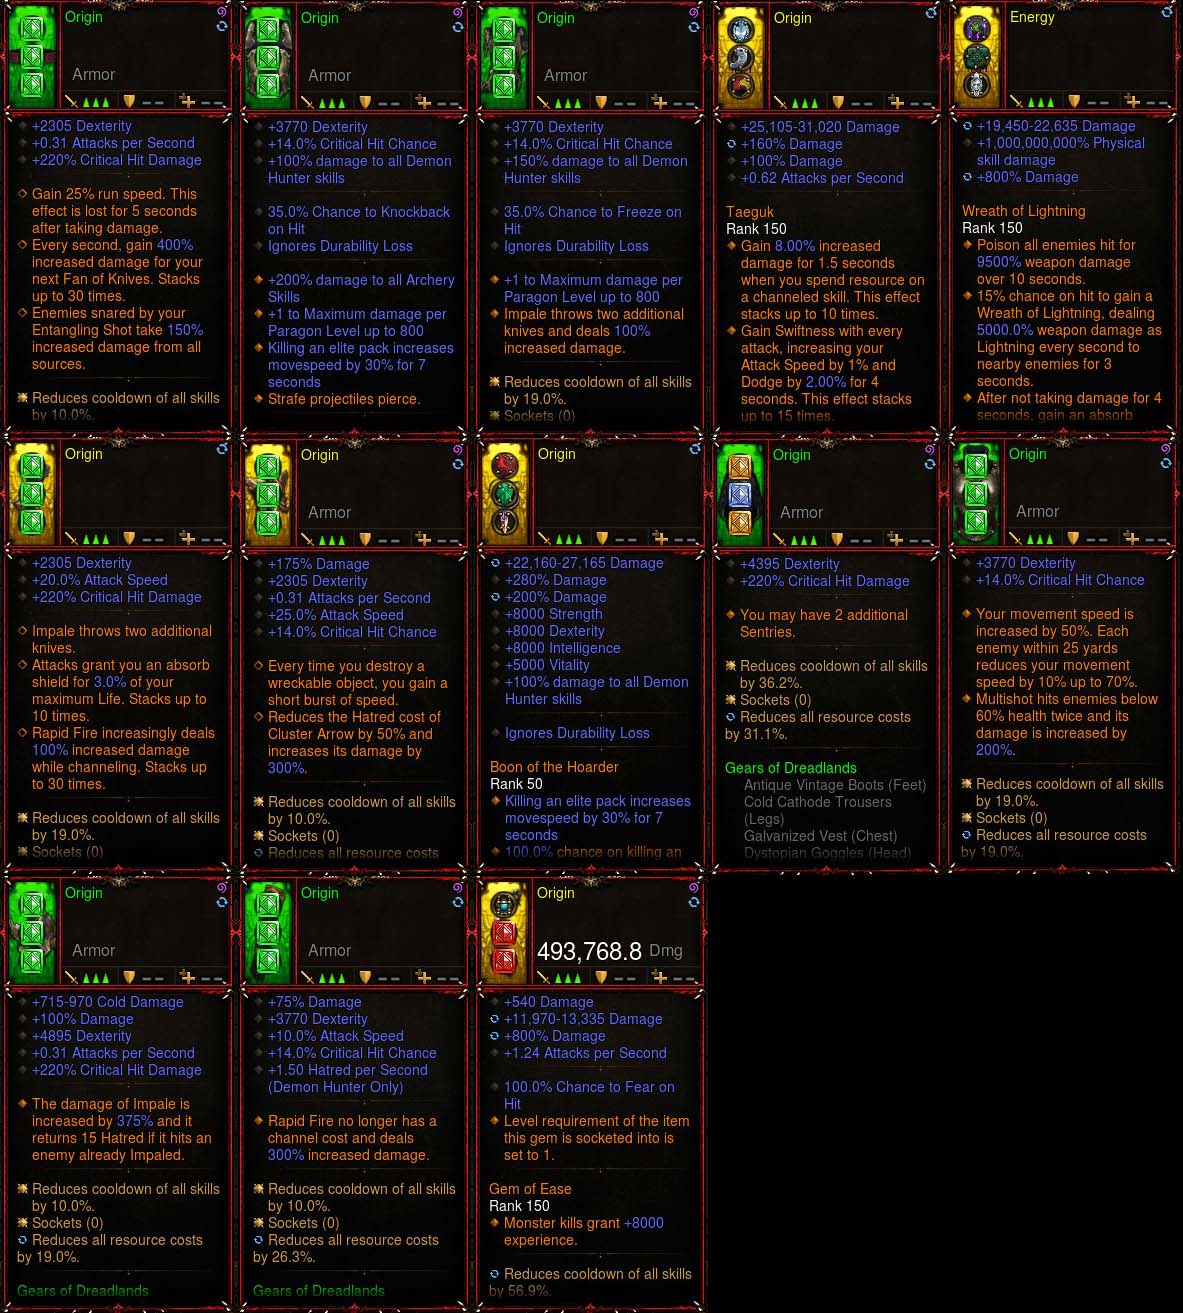 [Primal Eth+SoulShard Infused] Immortal v5 2.7.2 Dreadlands Super Speed Strafe Demon Hunter Origin Diablo 3 Mods ROS Seasonal and Non Seasonal Save Mod - Modded Items and Gear - Hacks - Cheats - Trainers for Playstation 4 - Playstation 5 - Nintendo Switch - Xbox One